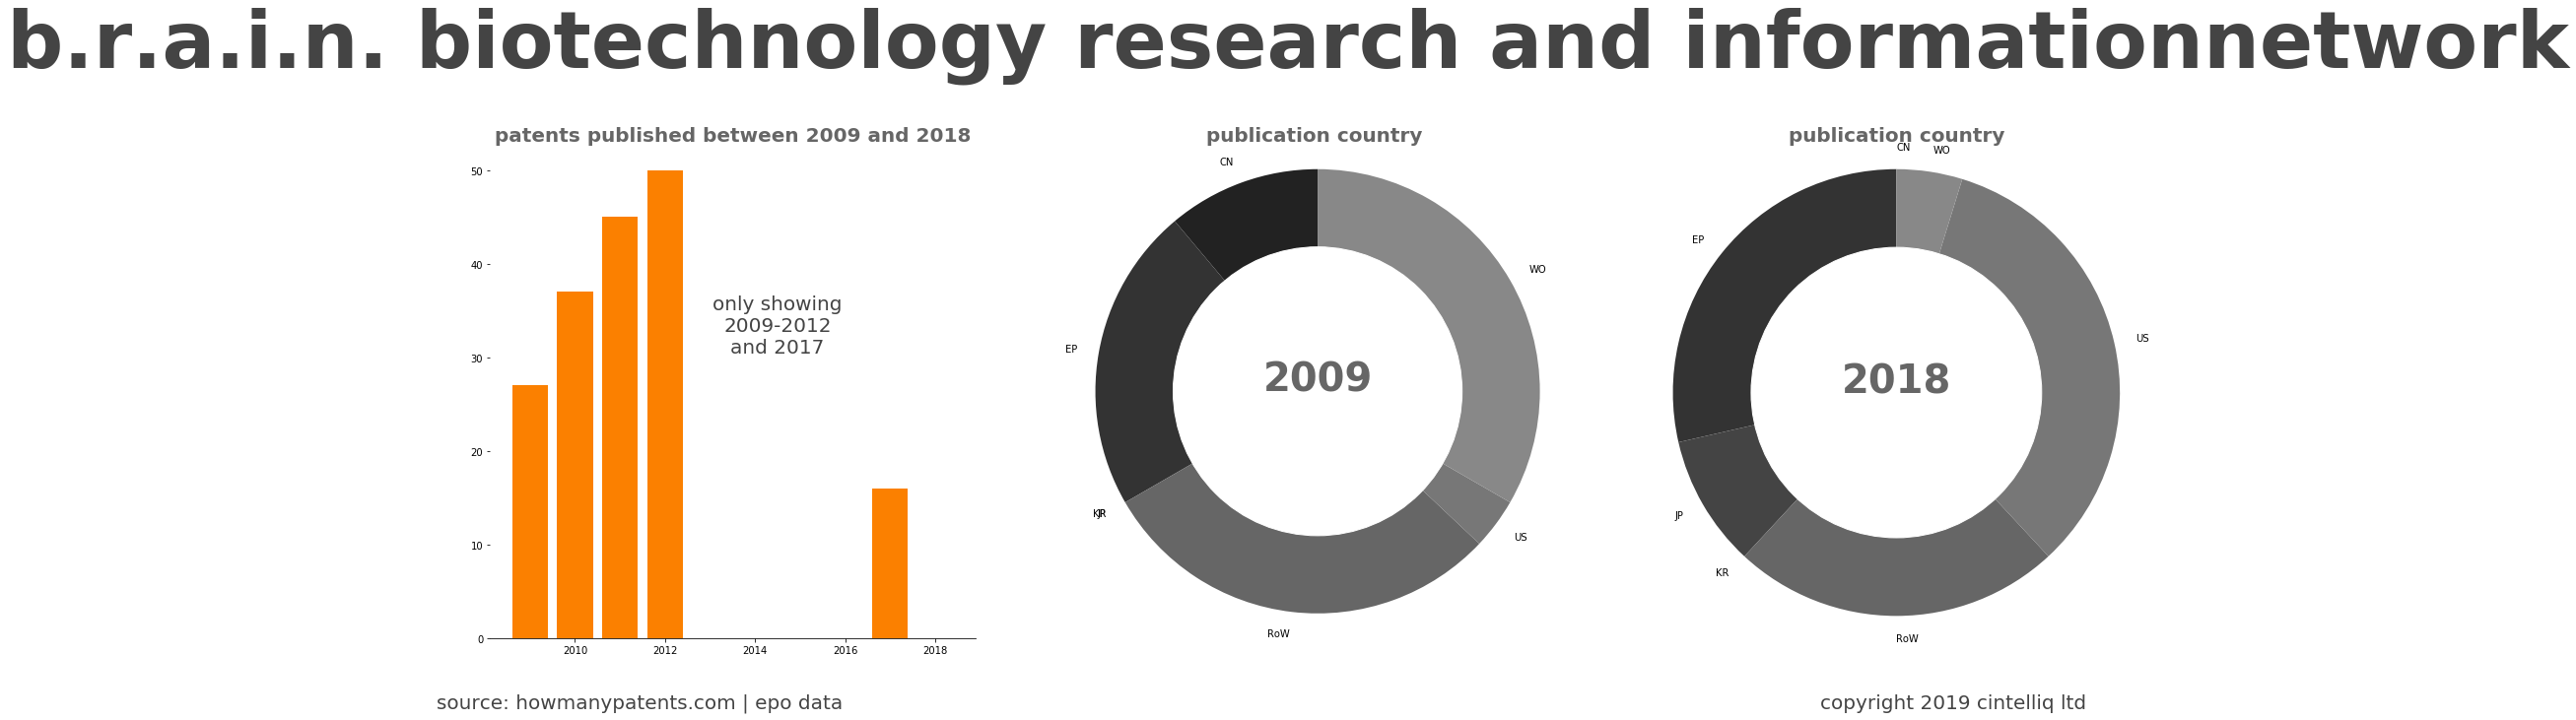 summary of patents for B.R.A.I.N. Biotechnology Research And Informationnetwork